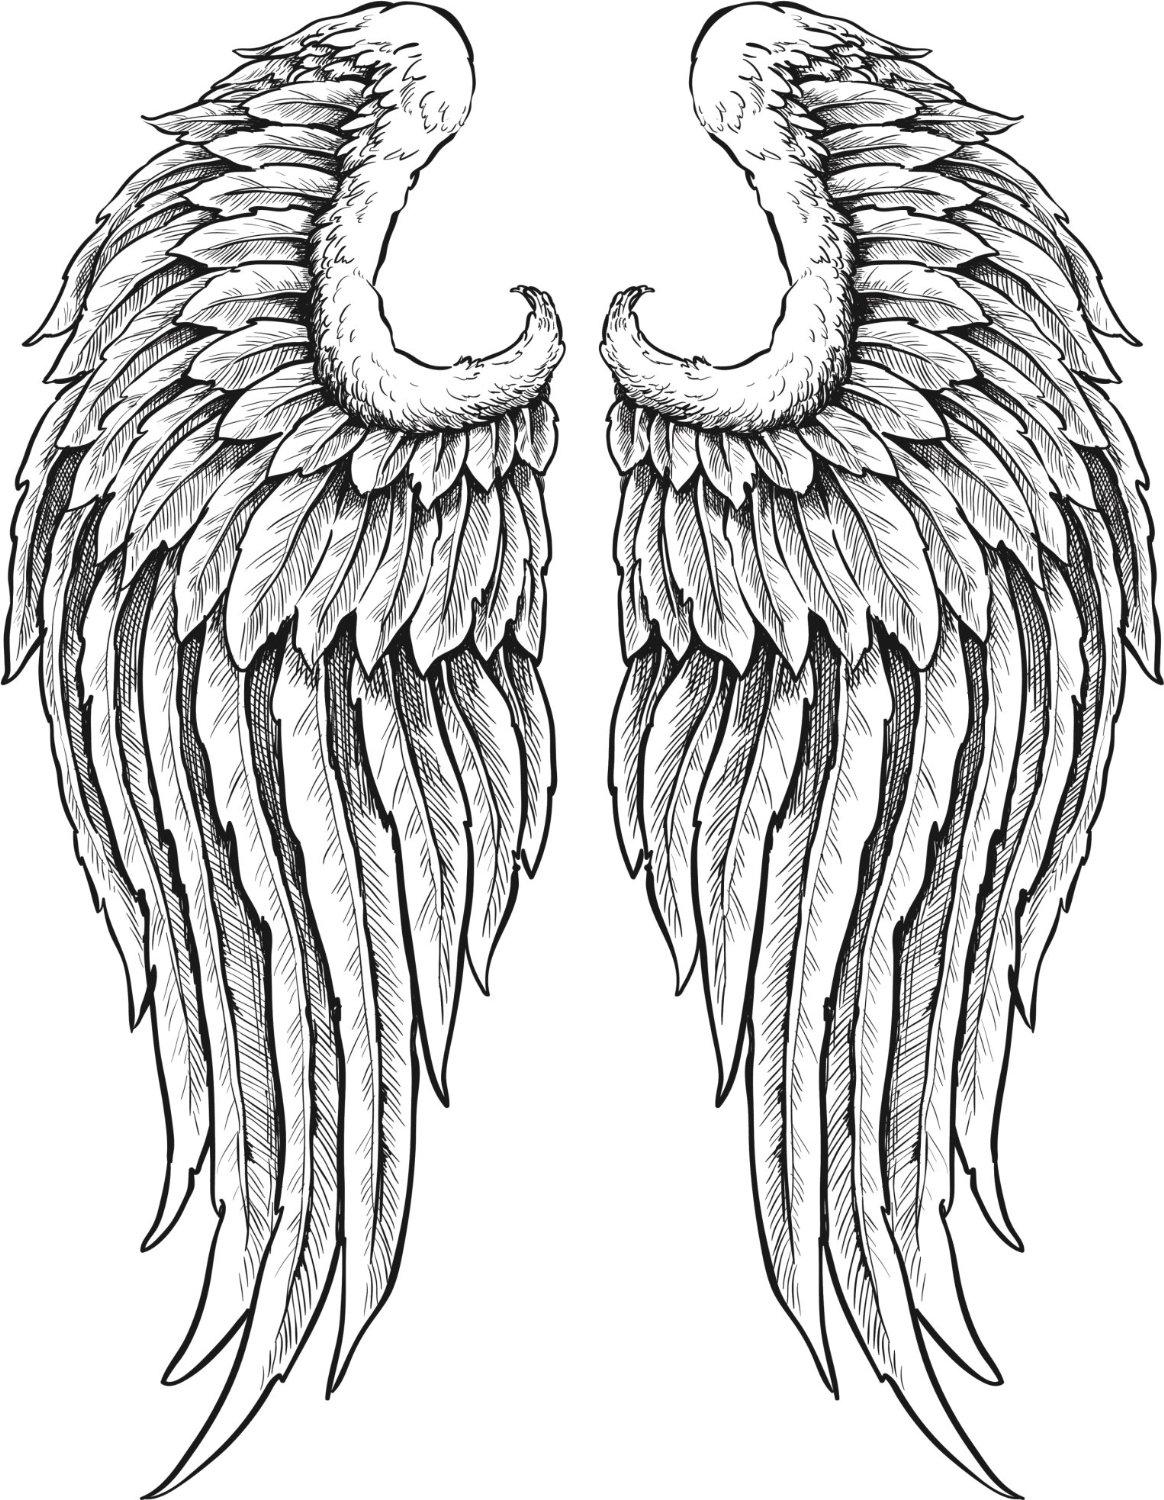 Amazon.com - DETAILED ANGEL WINGS WITH FEATHERS BLACK WHITE Vinyl ...